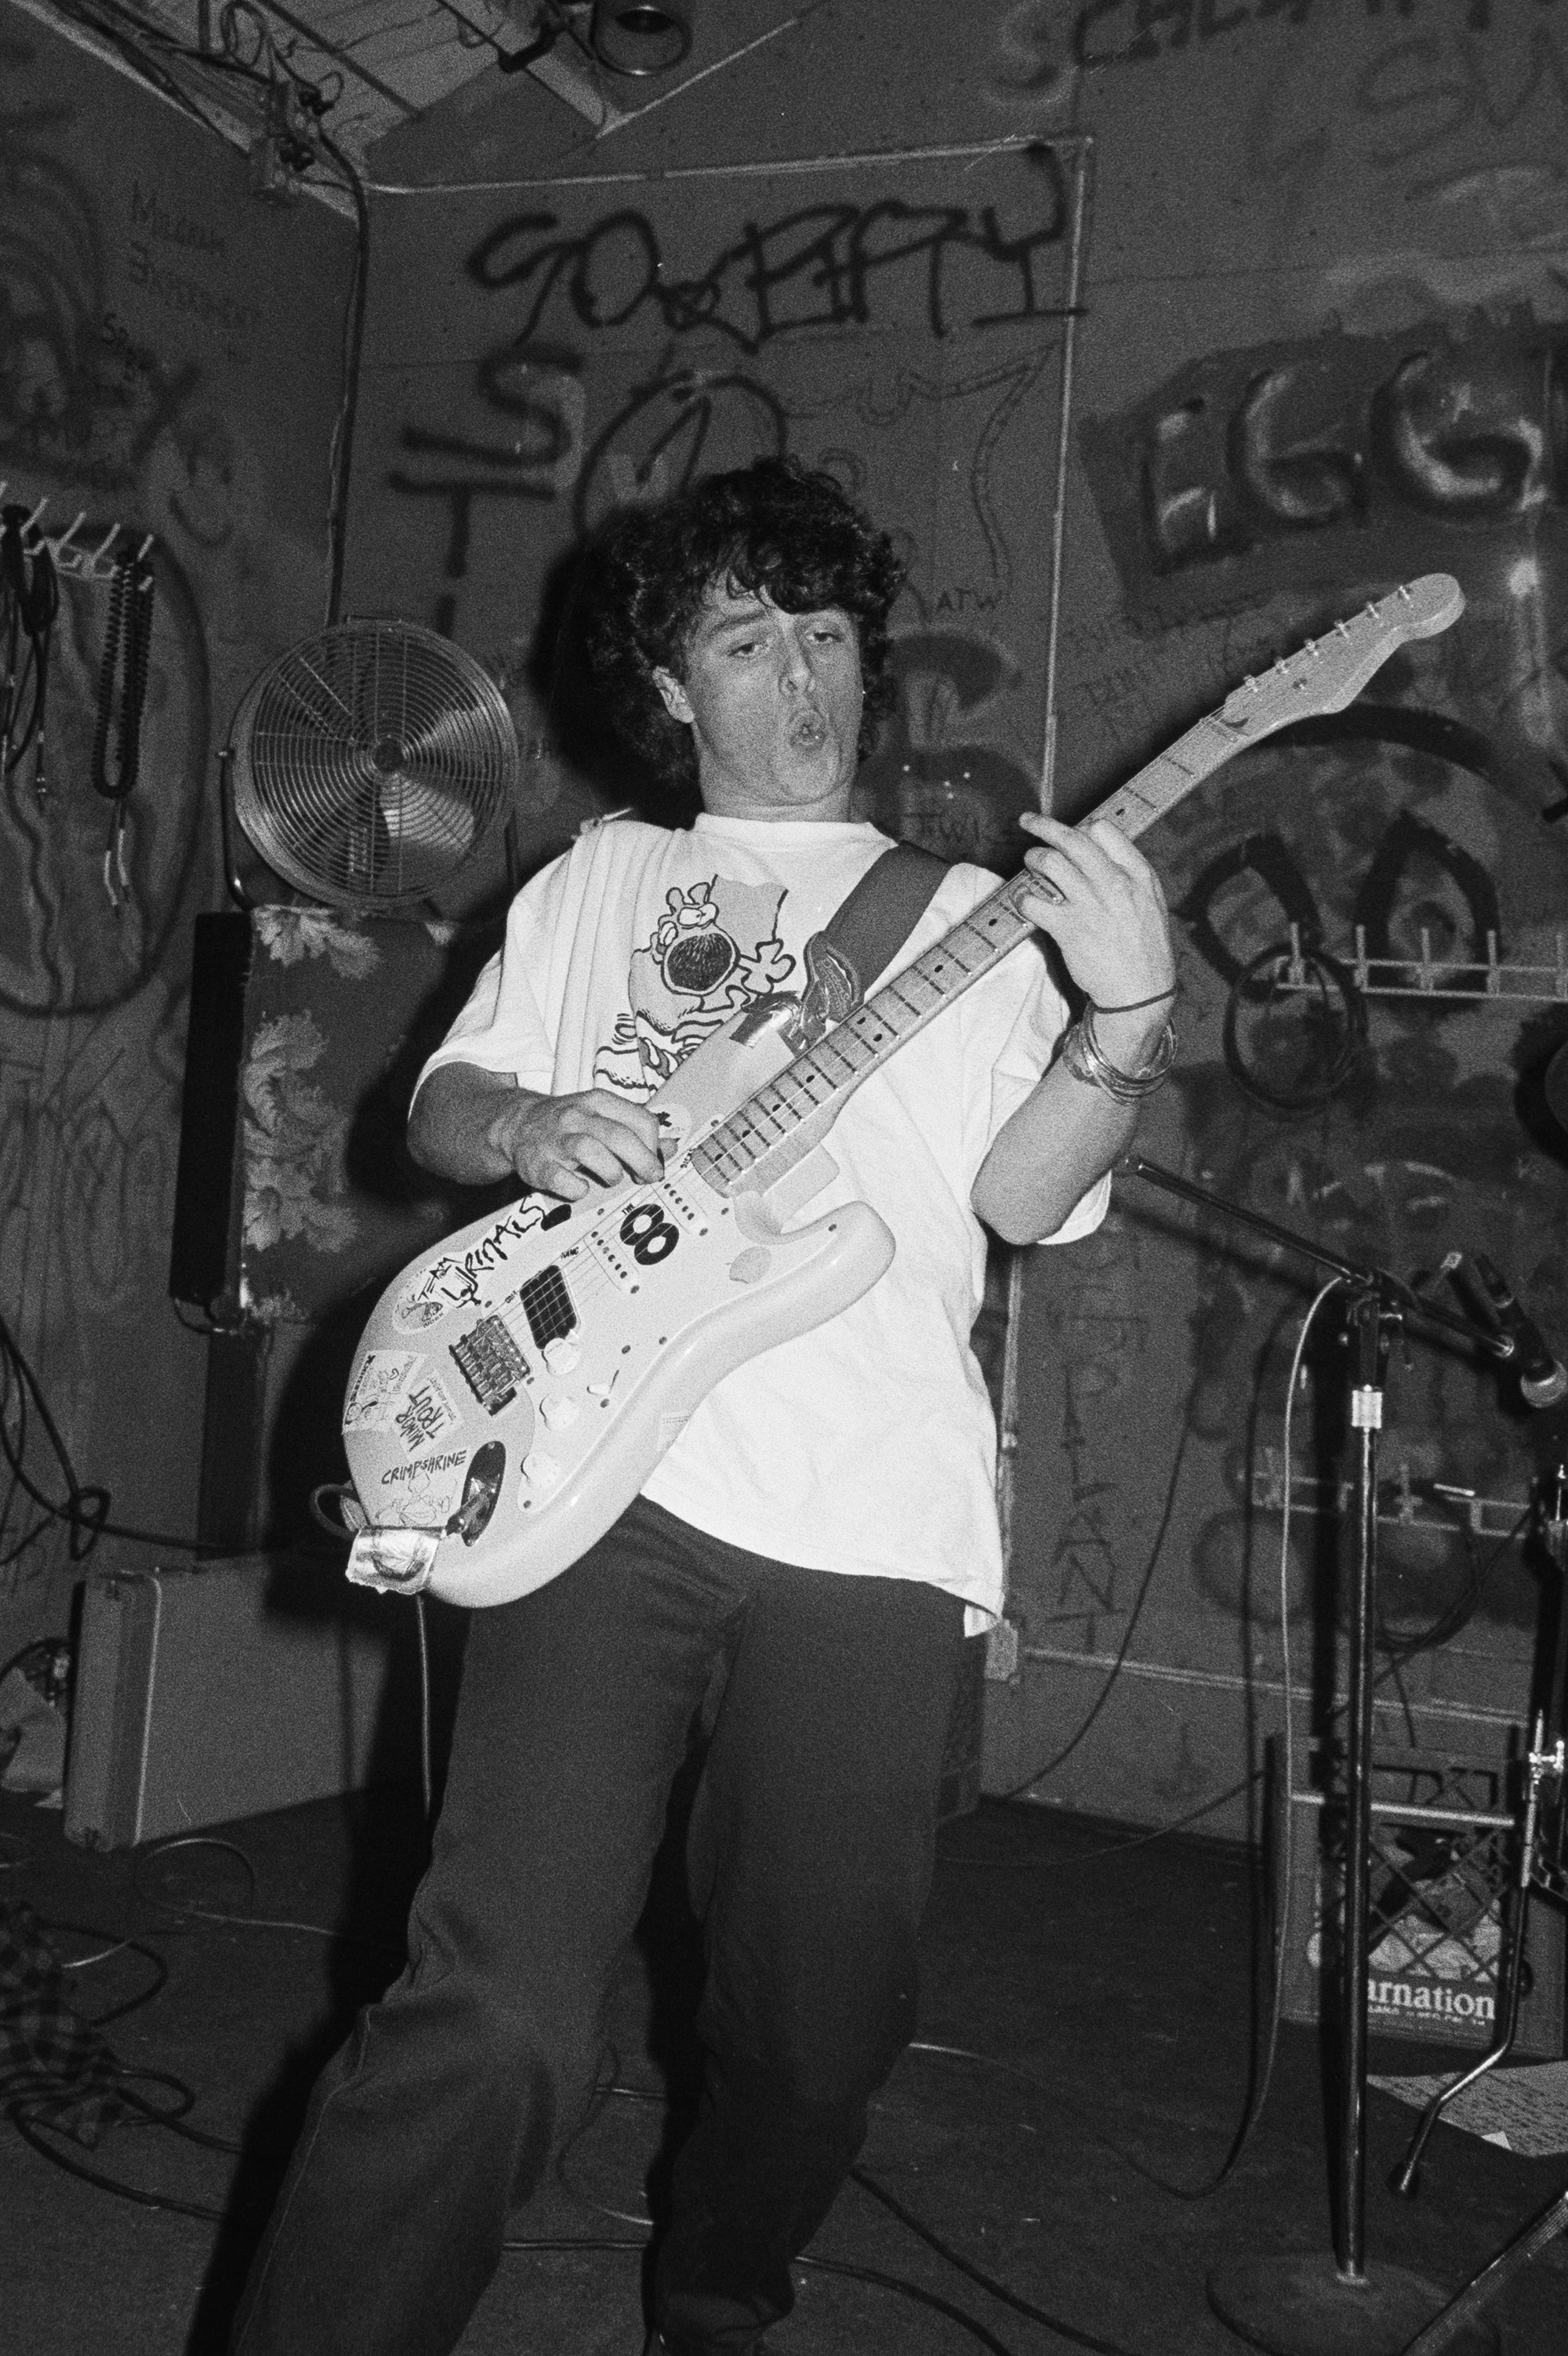 Green Day, then known as Sweet Children, perform at 924 Gilman Street on Nov. 26, 1988 in Berkeley, Calif.